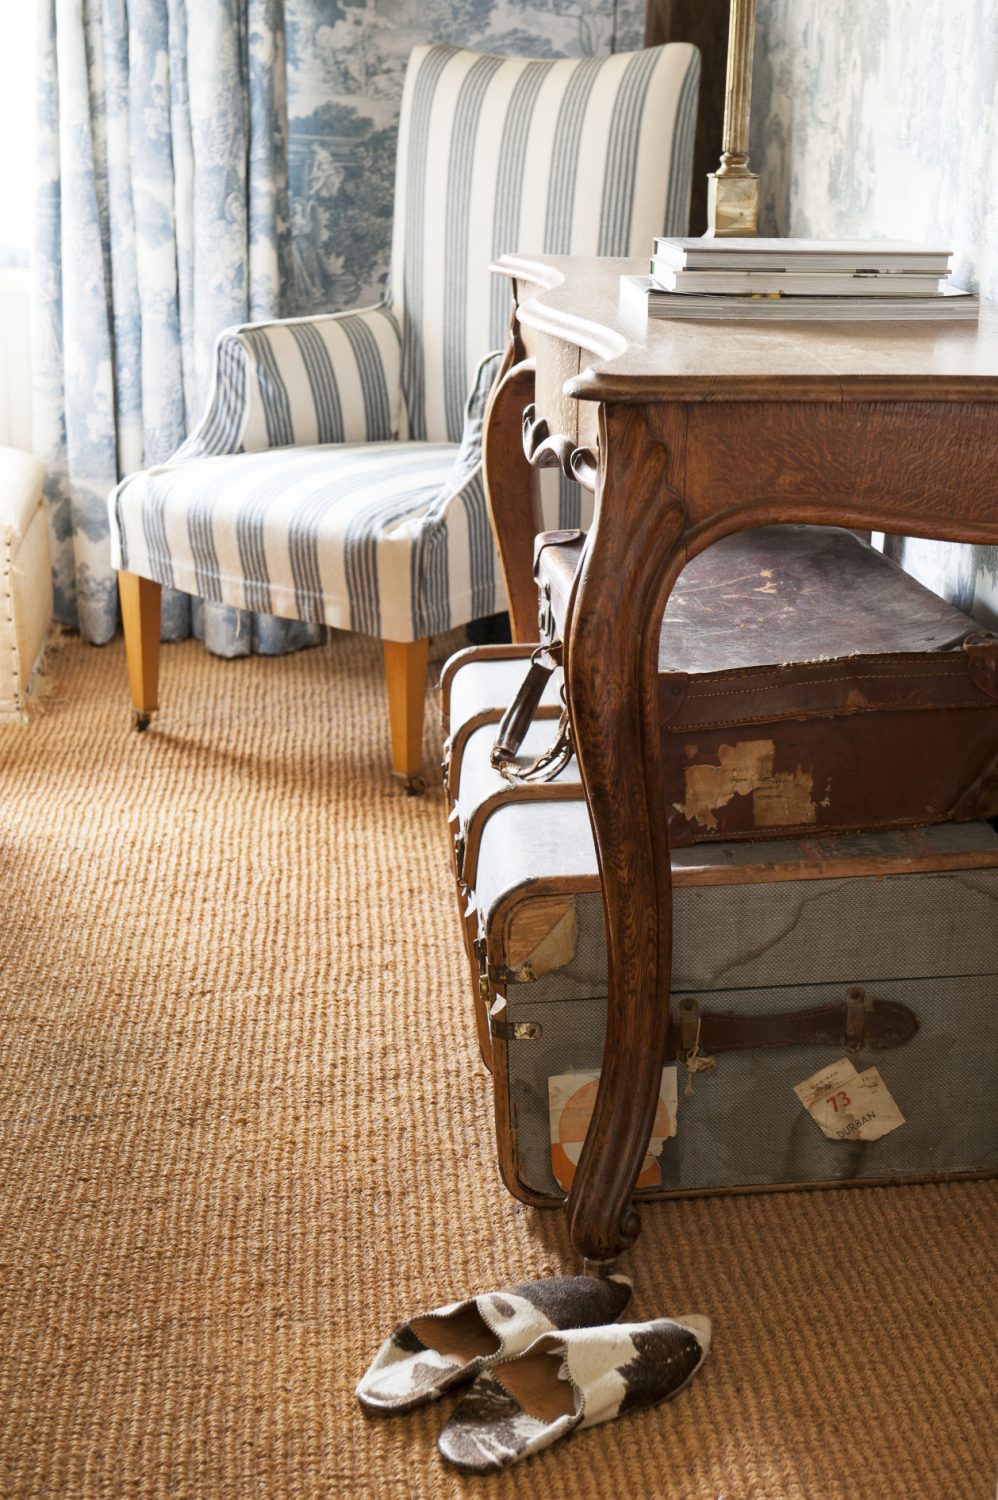 Well-travelled antique suitcases